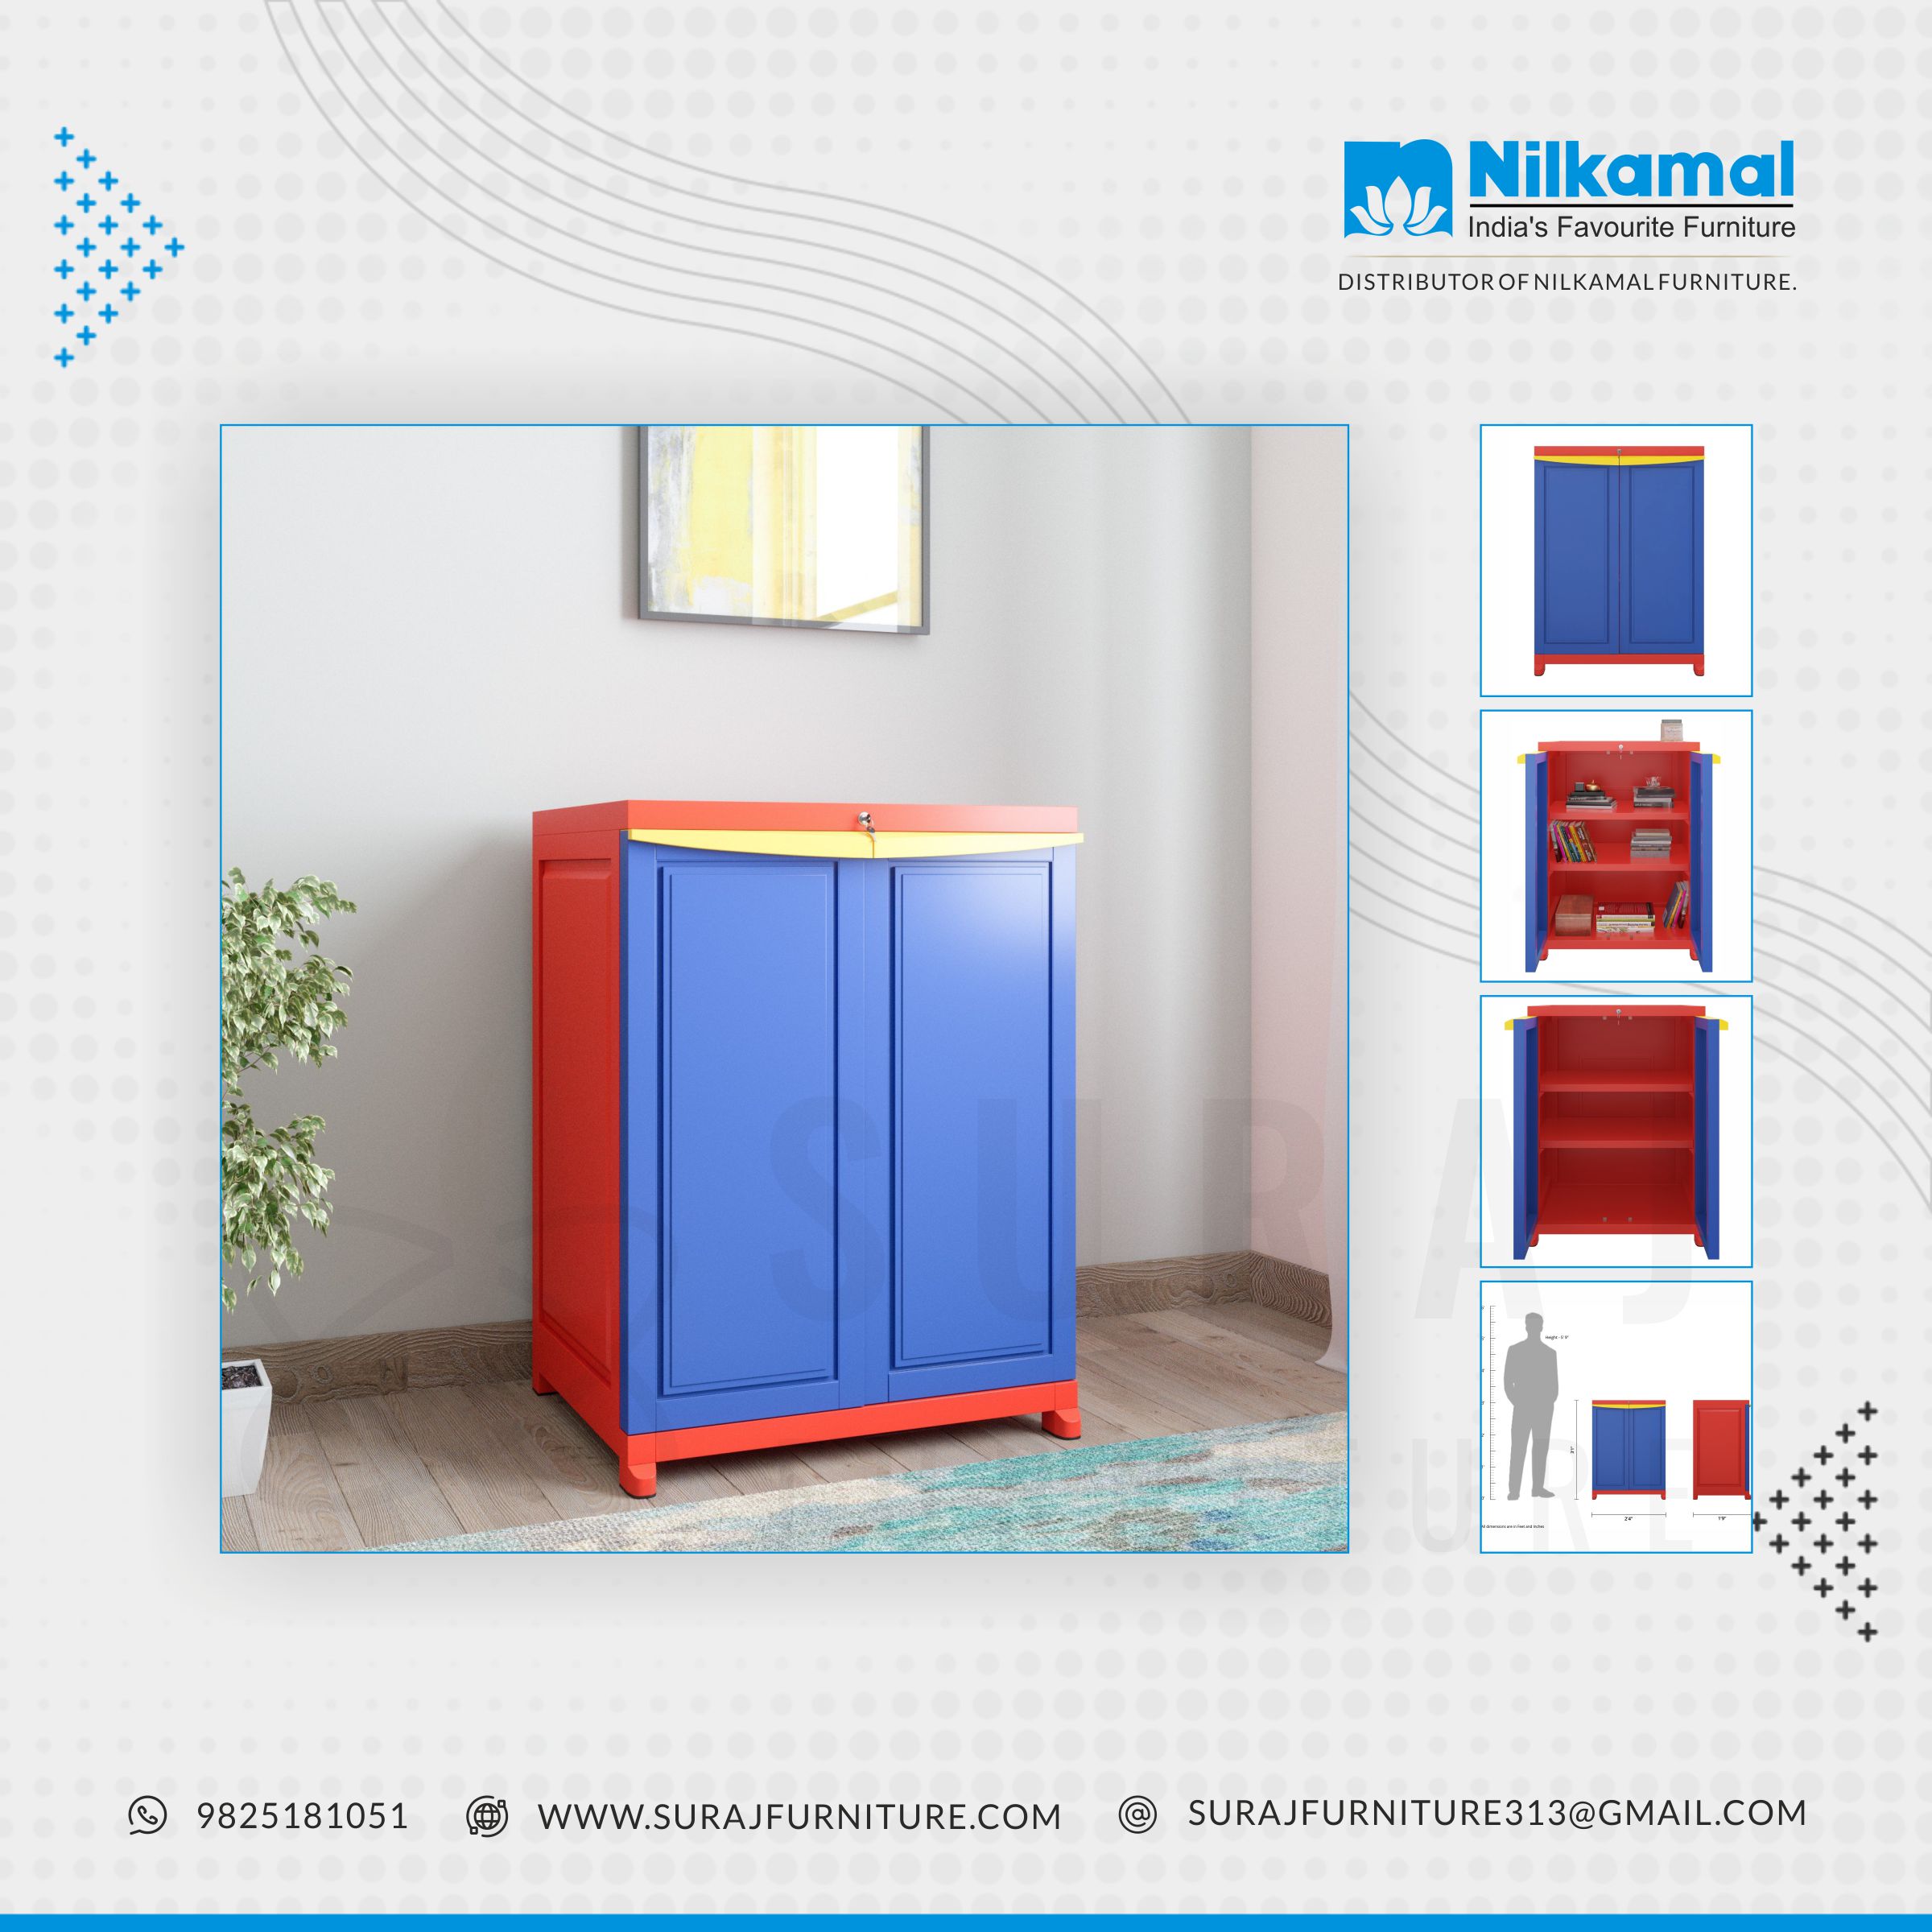 Plastic cupboard for clothes